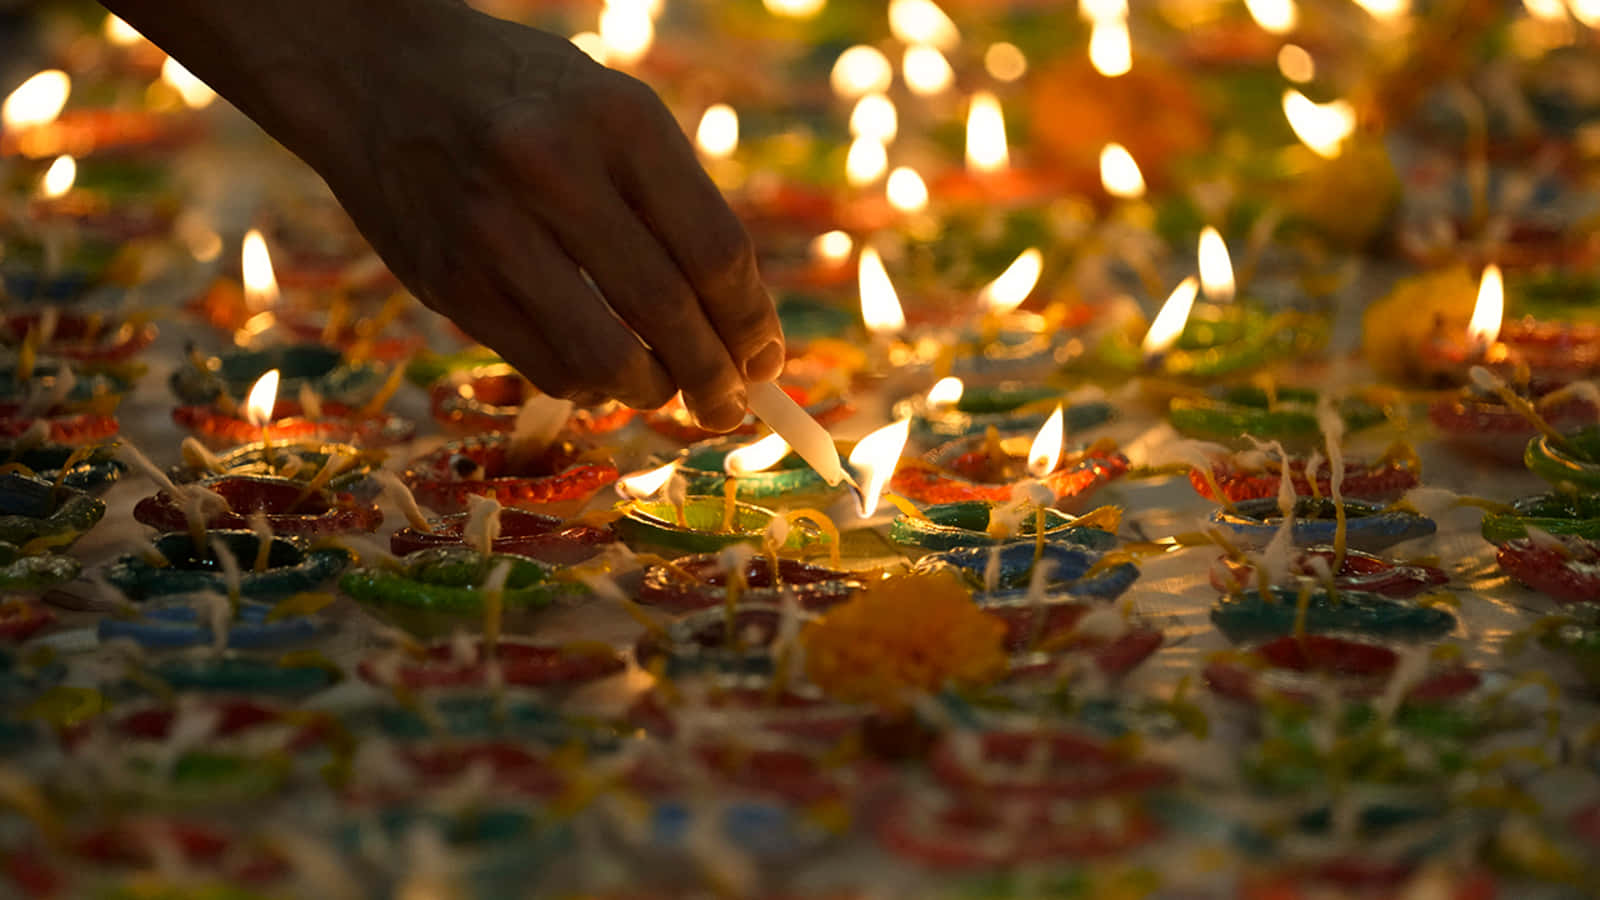 A Person Lighting A Candle On A Table Of Lit Candles